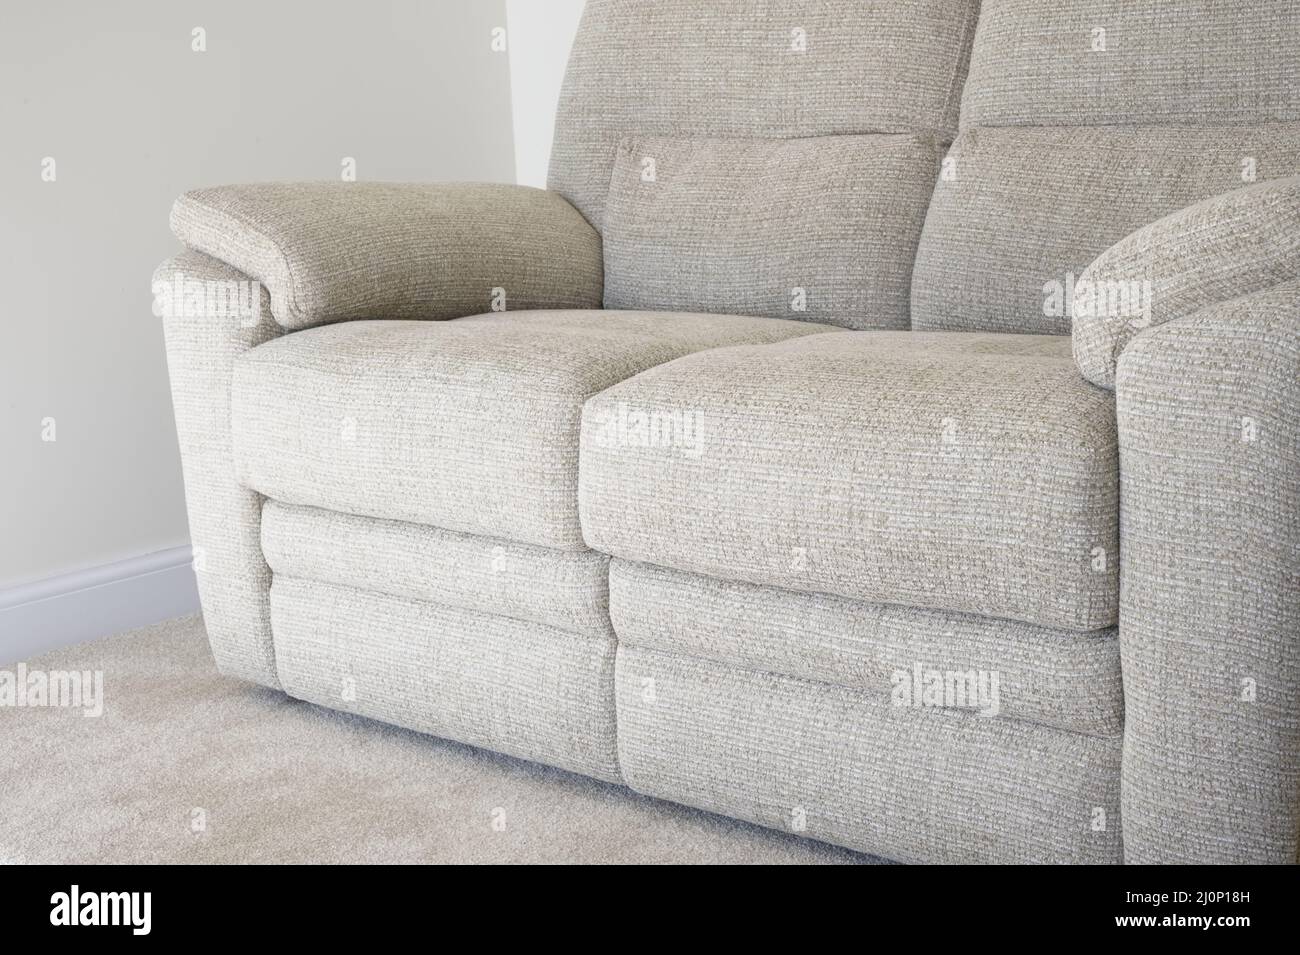 Neutral colour home interior showing sofa and carpet Stock Photo